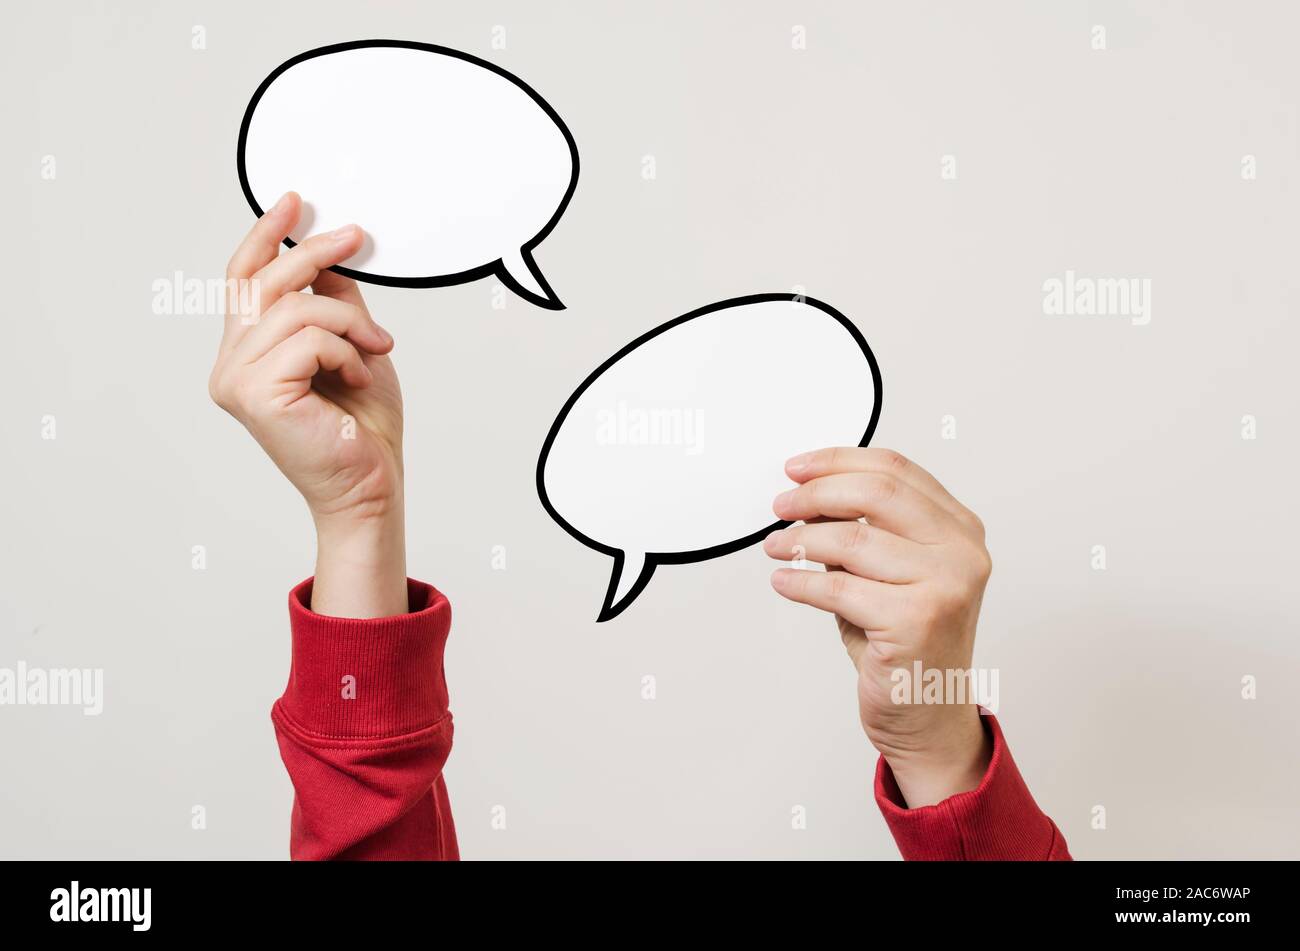 Hand holding two blank speech bubble sign ready for message Stock Photo